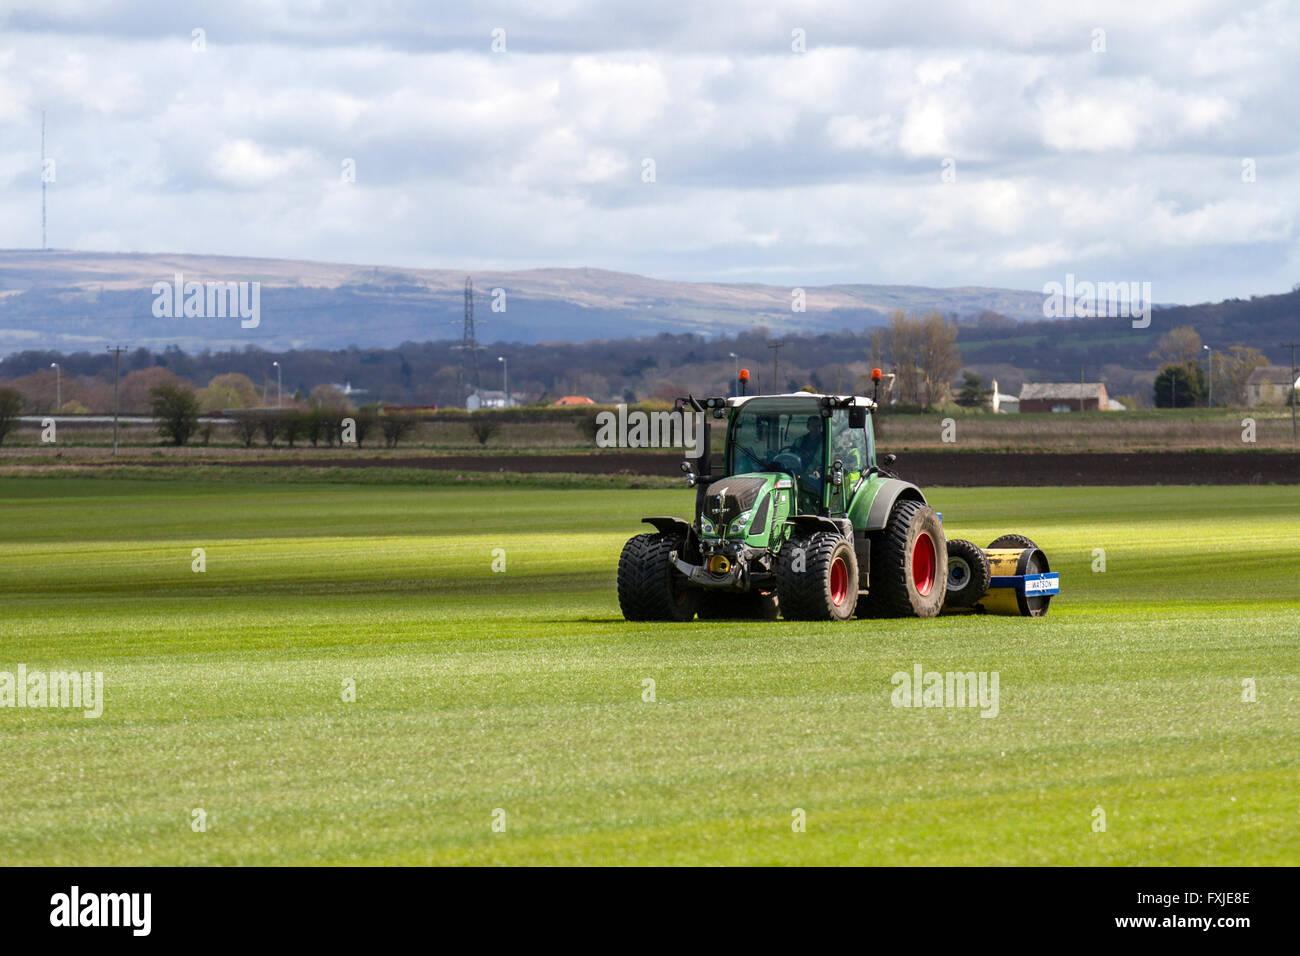 A farmer in Burscough, Lancashire, UK, driving machinery using a Fendt 516 Vario tractor and a Watson roller mower to compress and level the new crop of meadow grasses grown for the local demand for growing turf. Fast growth for commercial. turf production. When you're growing turf for mechanical harvesting, you need rapid growth and a strong network of roots. Customers order landscaping turf for a wide range of uses from hard-wearing sports fields to easy-maintenance domestic gardens. Stock Photo